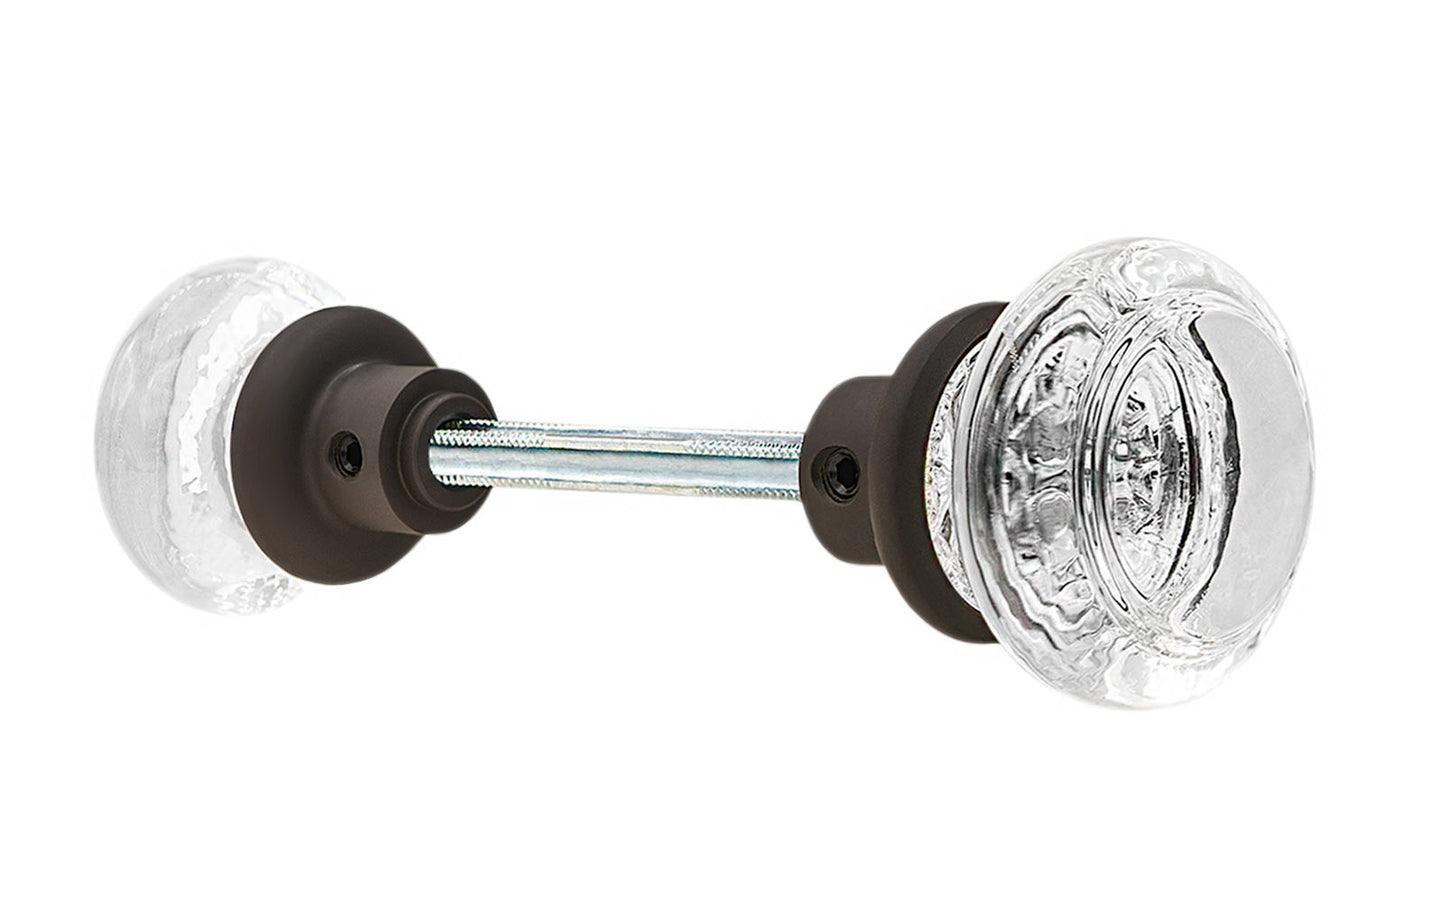 Pair of Classic Round Clear Glass Doorknobs with spindle. A high quality & genuine glass doorknob set with an attractive round design. The sparkling center point under glass amplifies reflected light to showcase beautiful facets. Solid brass base. Reproduction Glass Door Knobs. Traditional Round Glass Knobs. Oil Rubbed Bronze Finish.